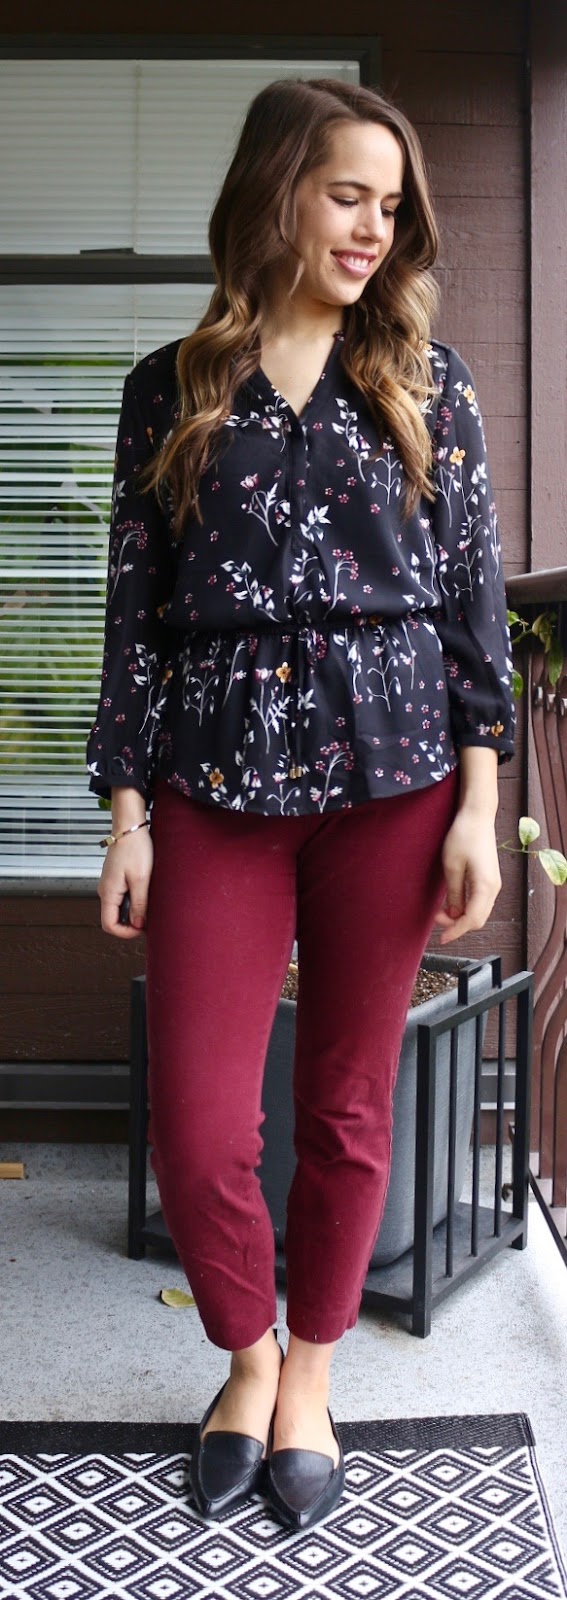 Jules in Flats - Dark Floral Peplum Blouse and Burgundy Ankle Pants